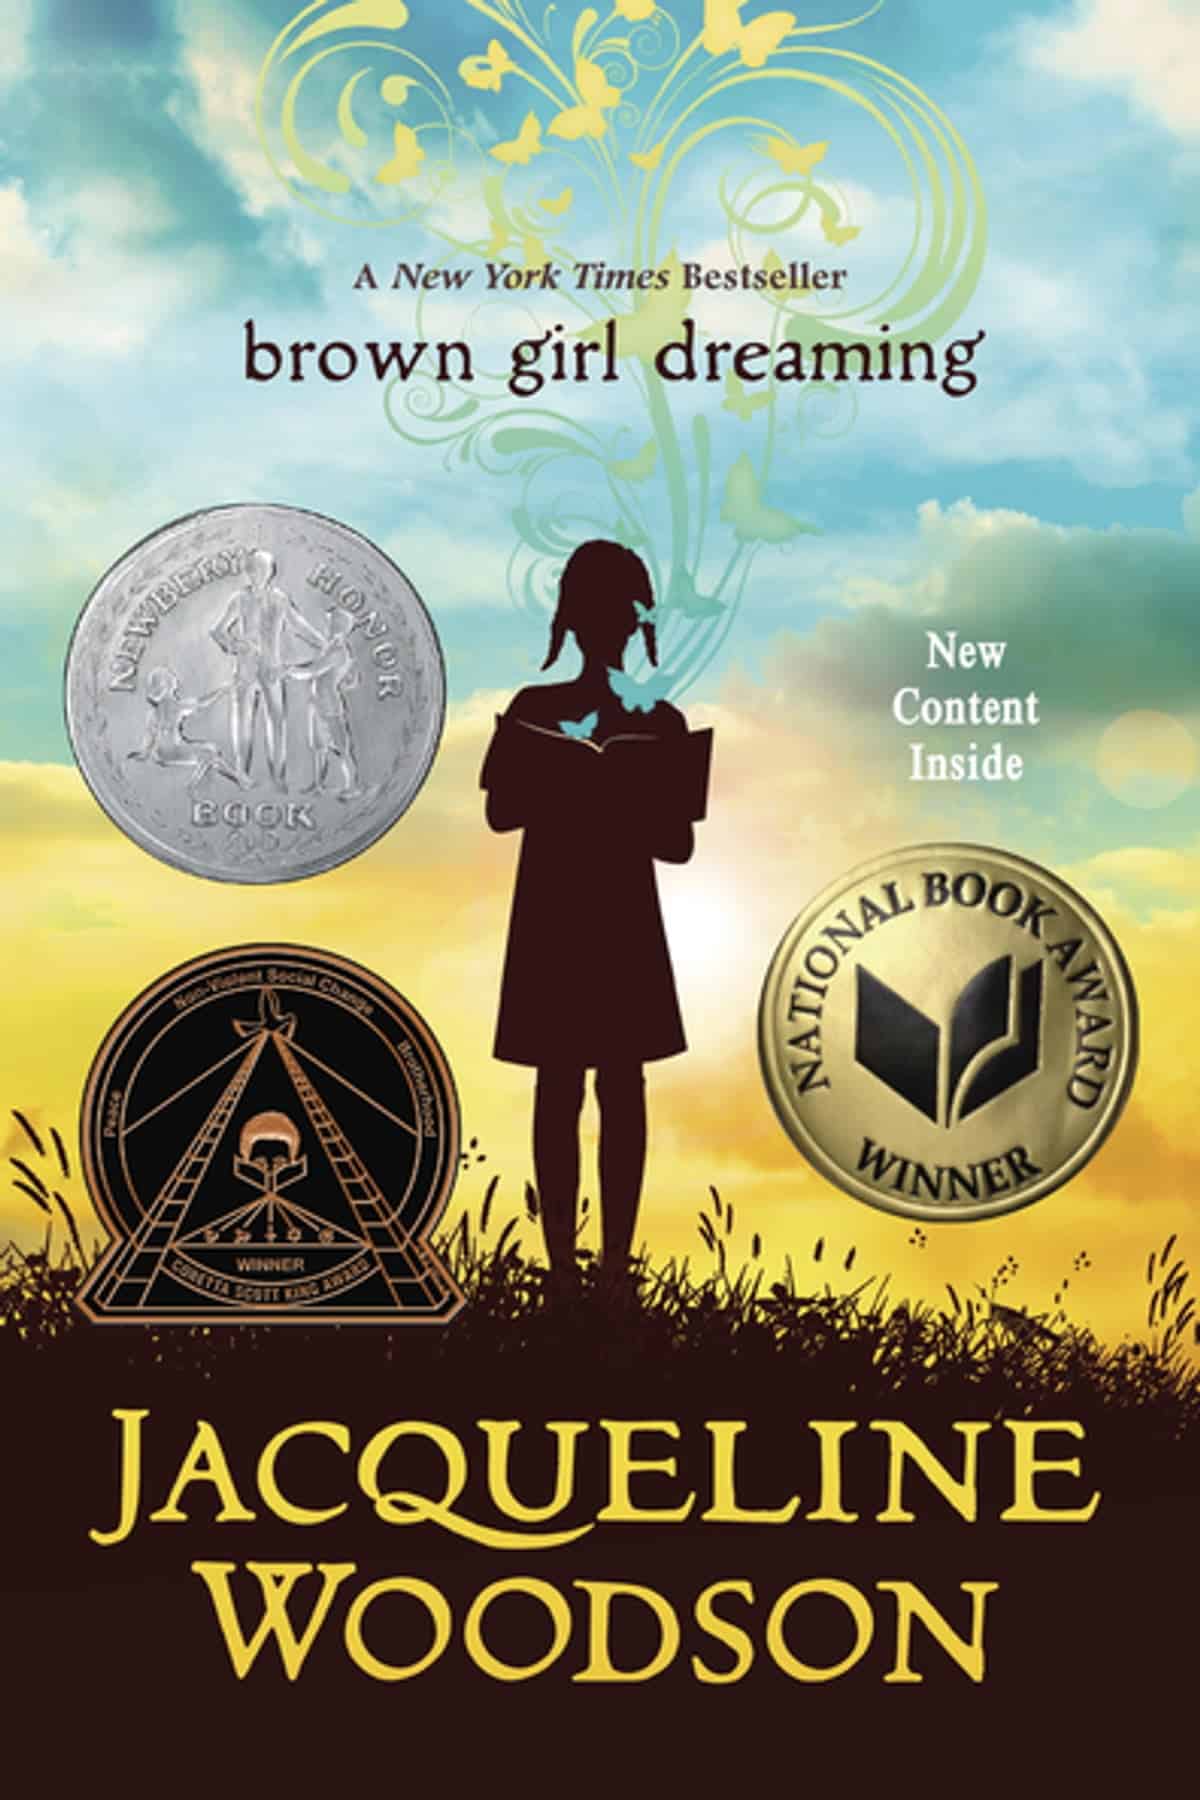 The cover for the book brown girl dreaming